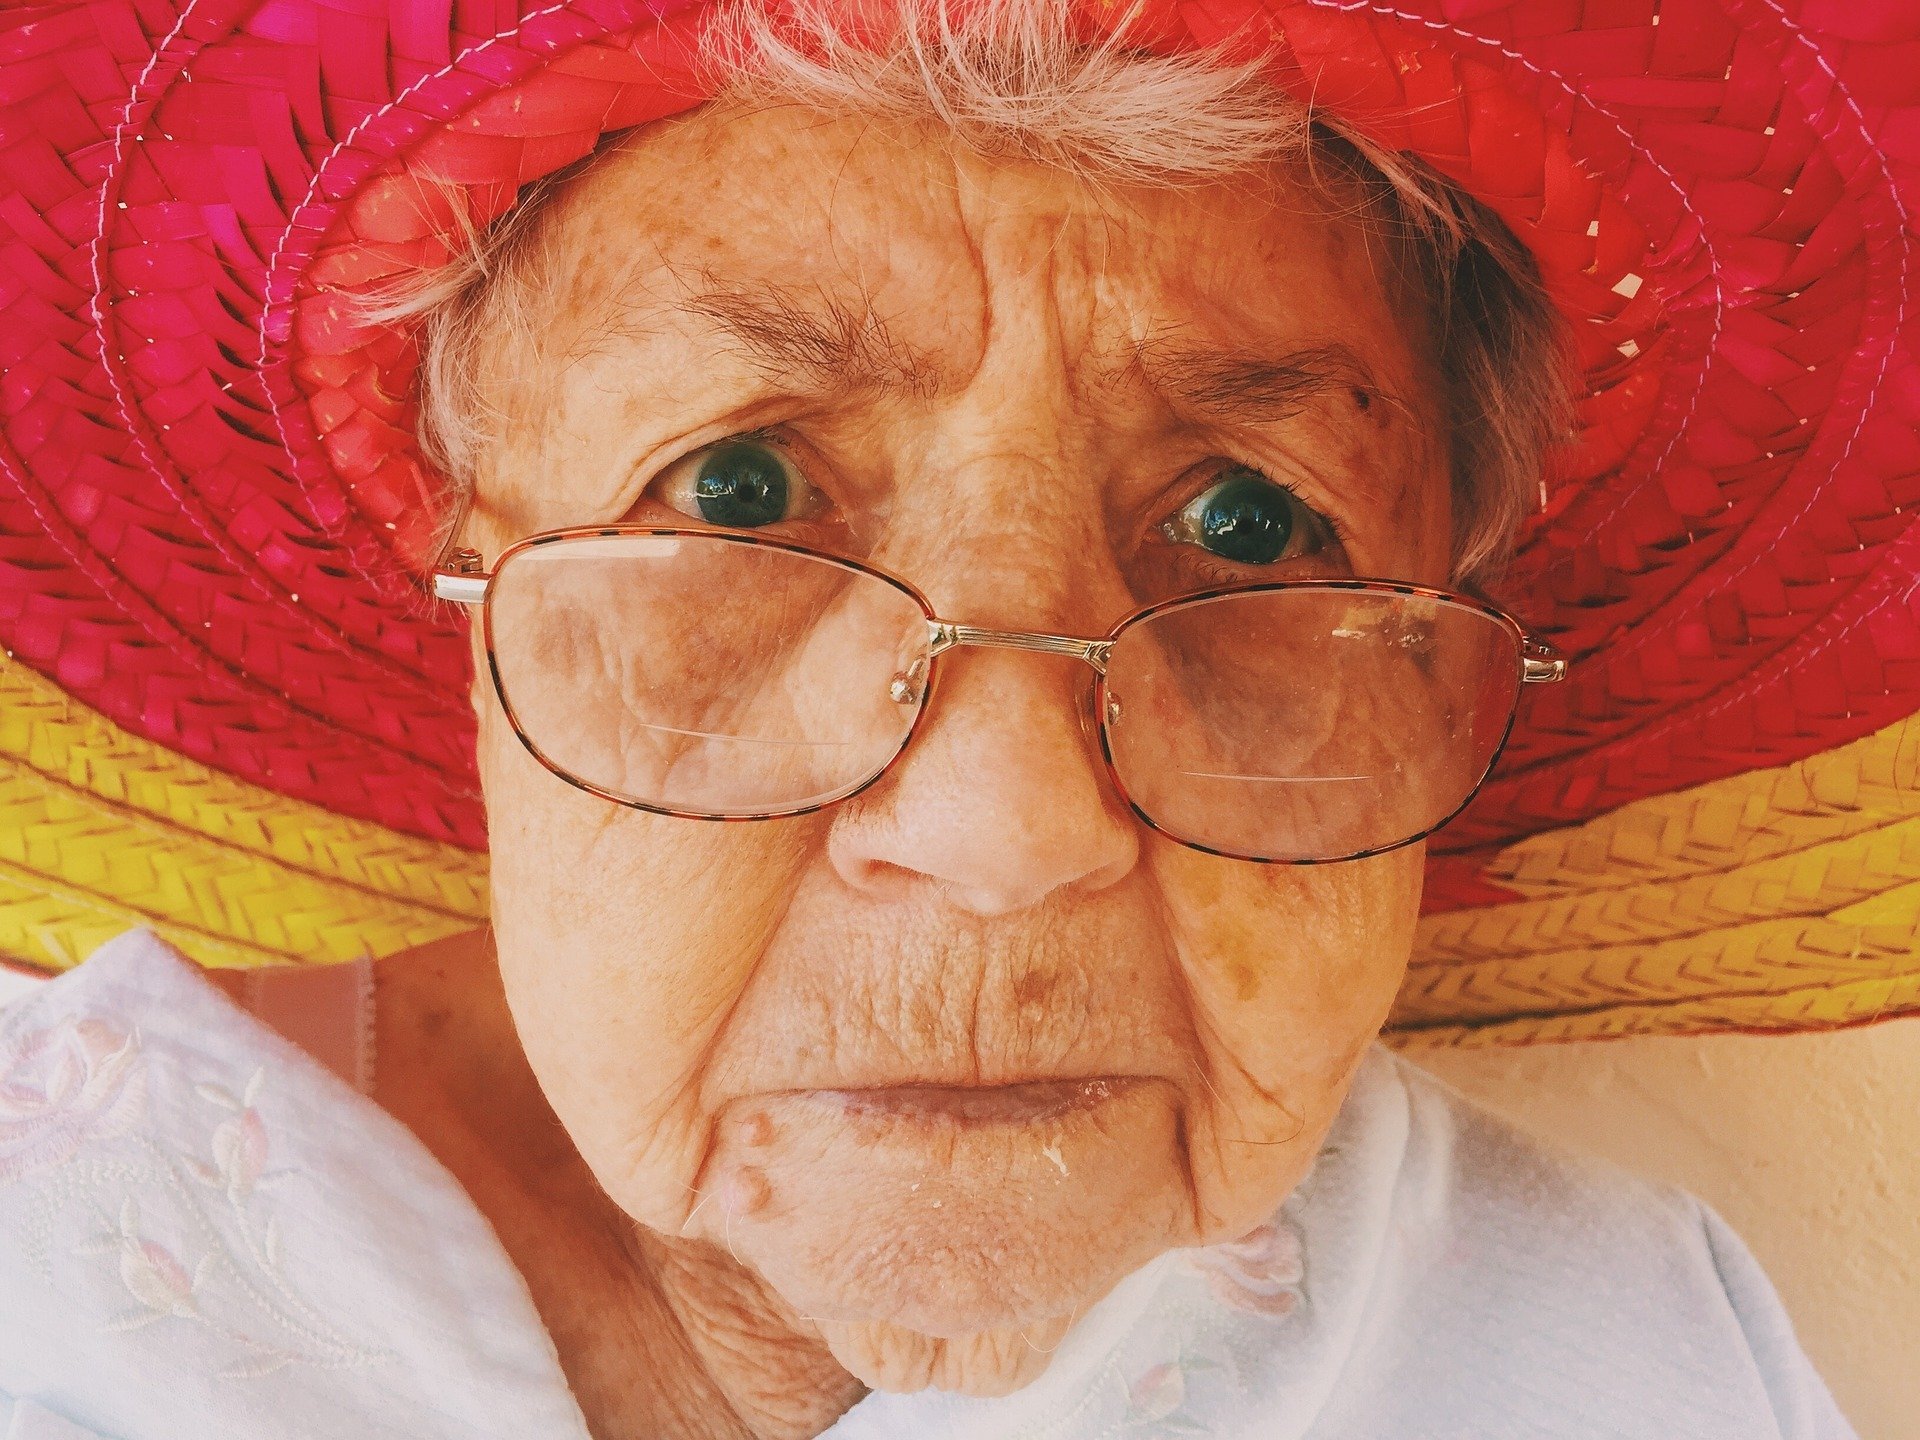 An old woman looking shocked while wearing a colorful hat and glasses | Photo: Pixabay/Free-Photos